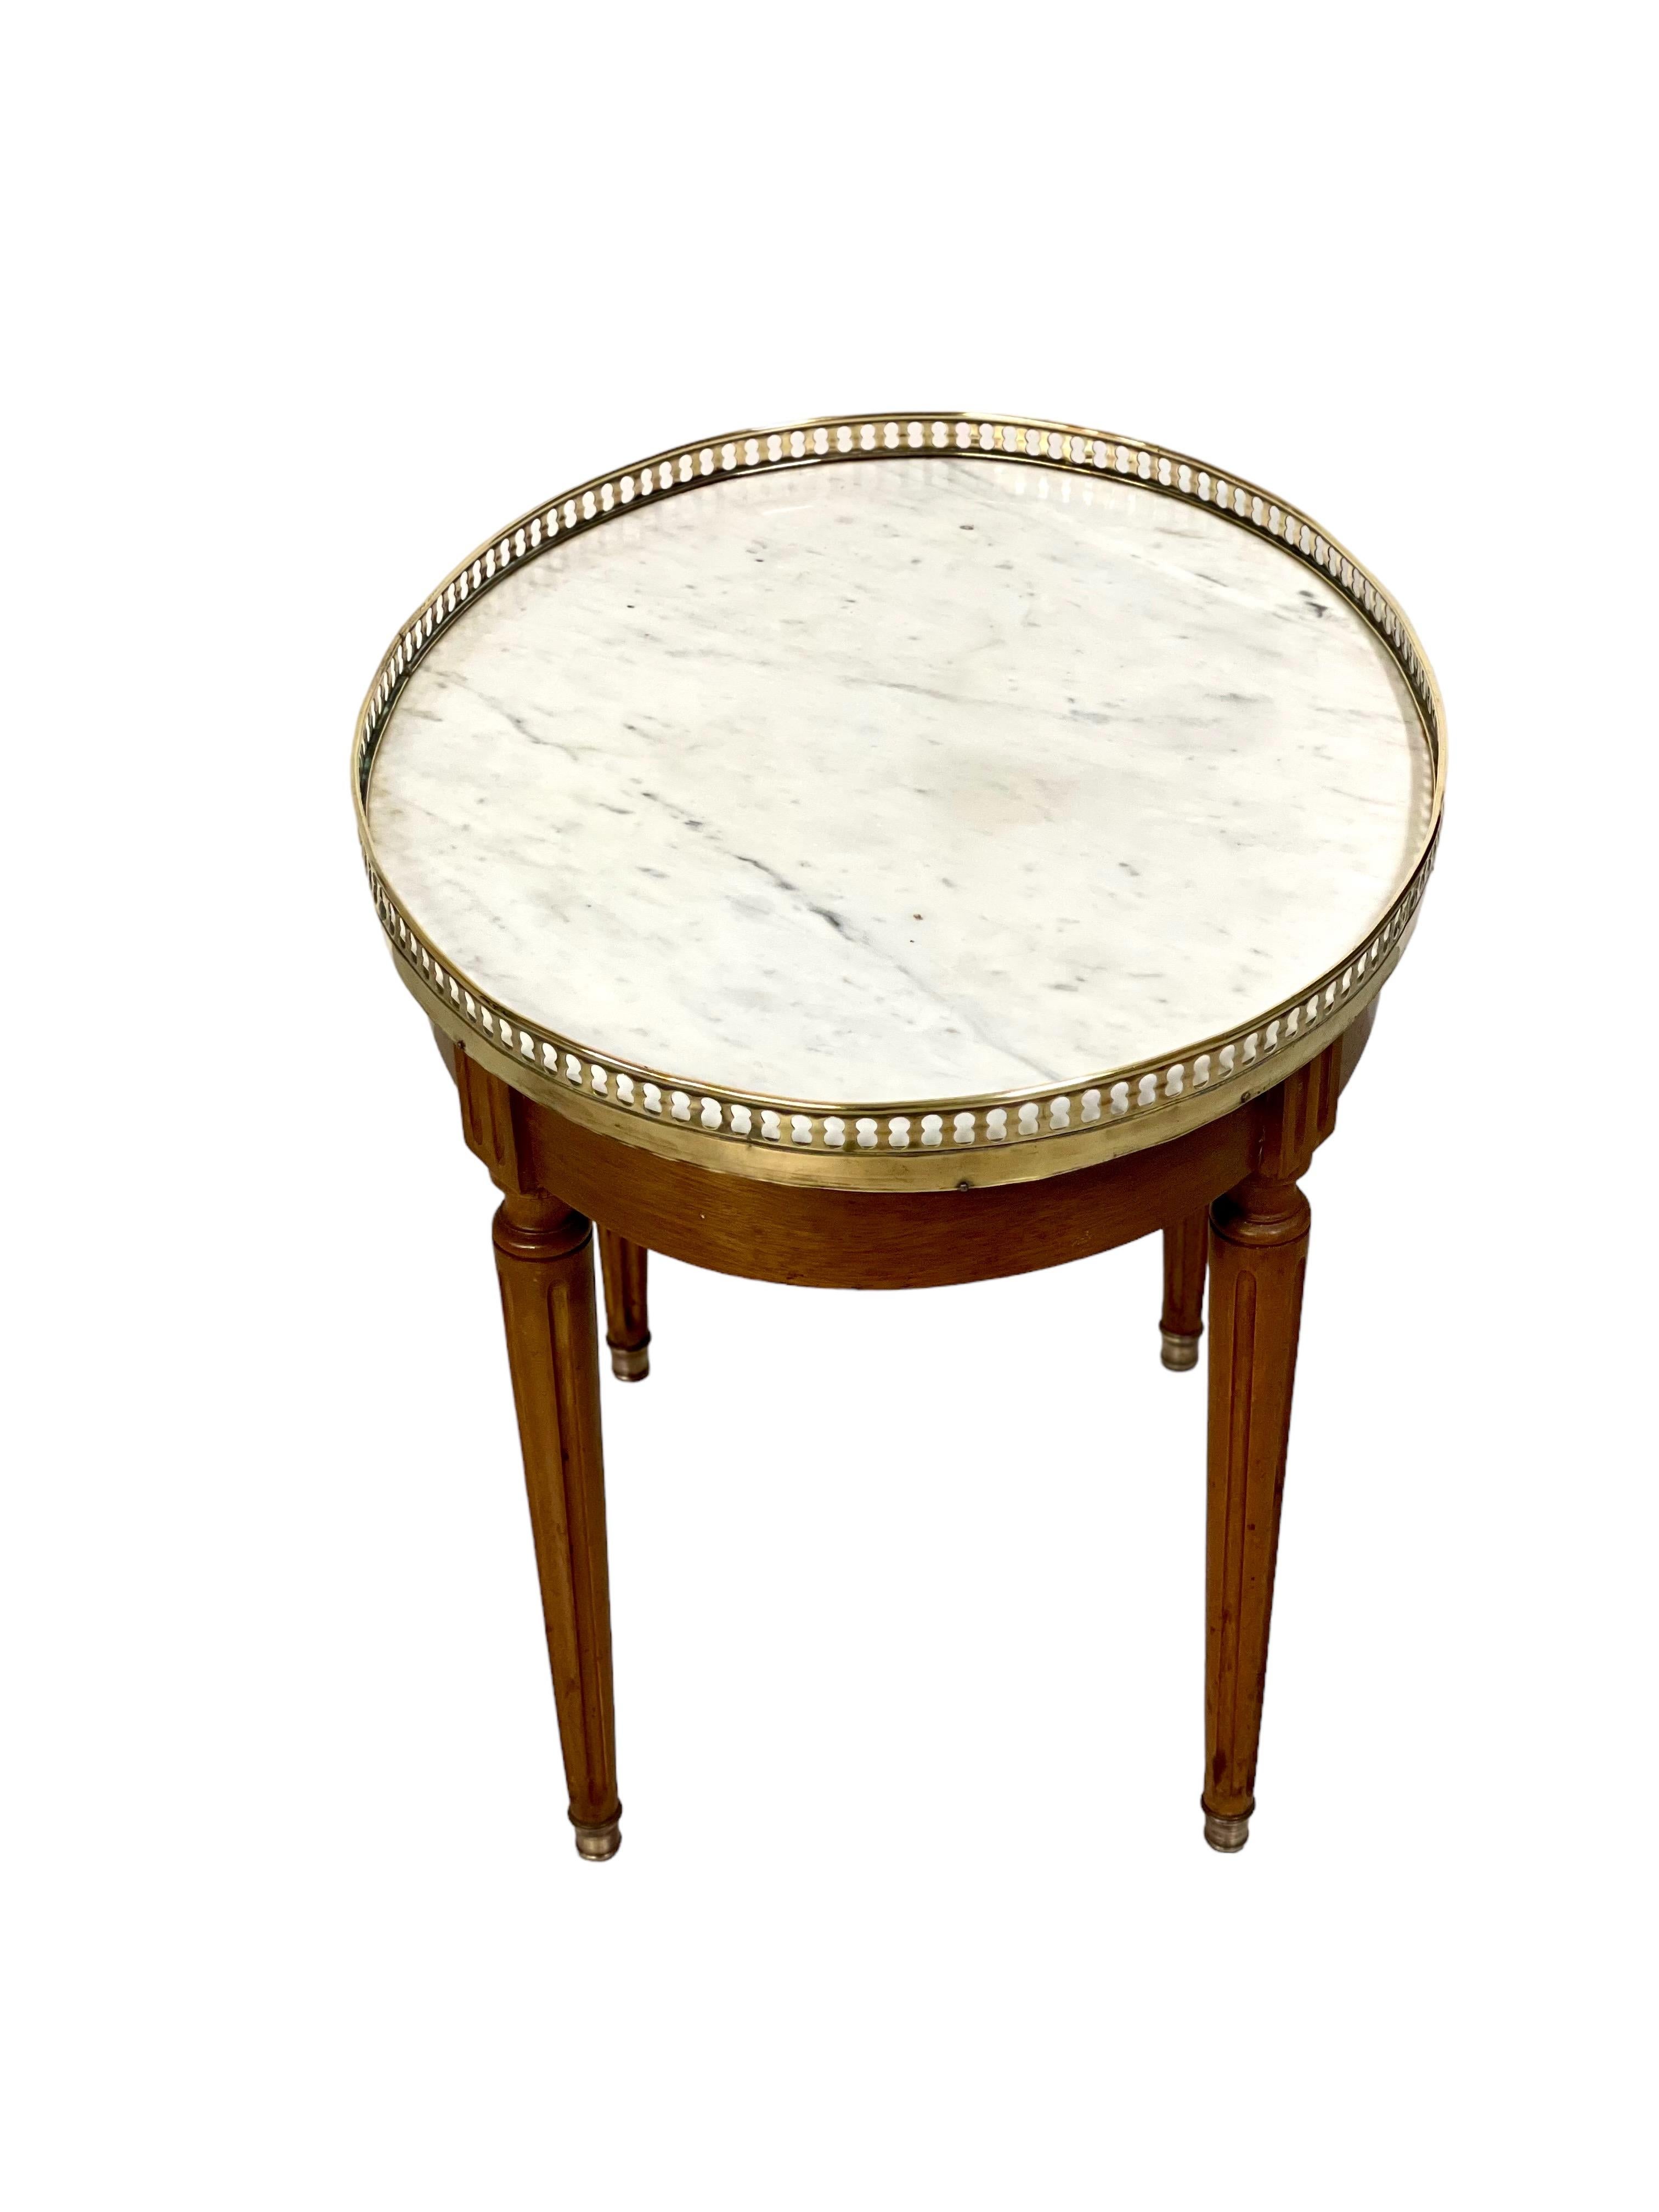 A charming Louis XVI style occasional table featuring an inset circular grey and white veined marble top, with a reticulated brass gallery edge. This oval-shaped table is raised on four turned and tapering fluted legs terminating in brass feet. In